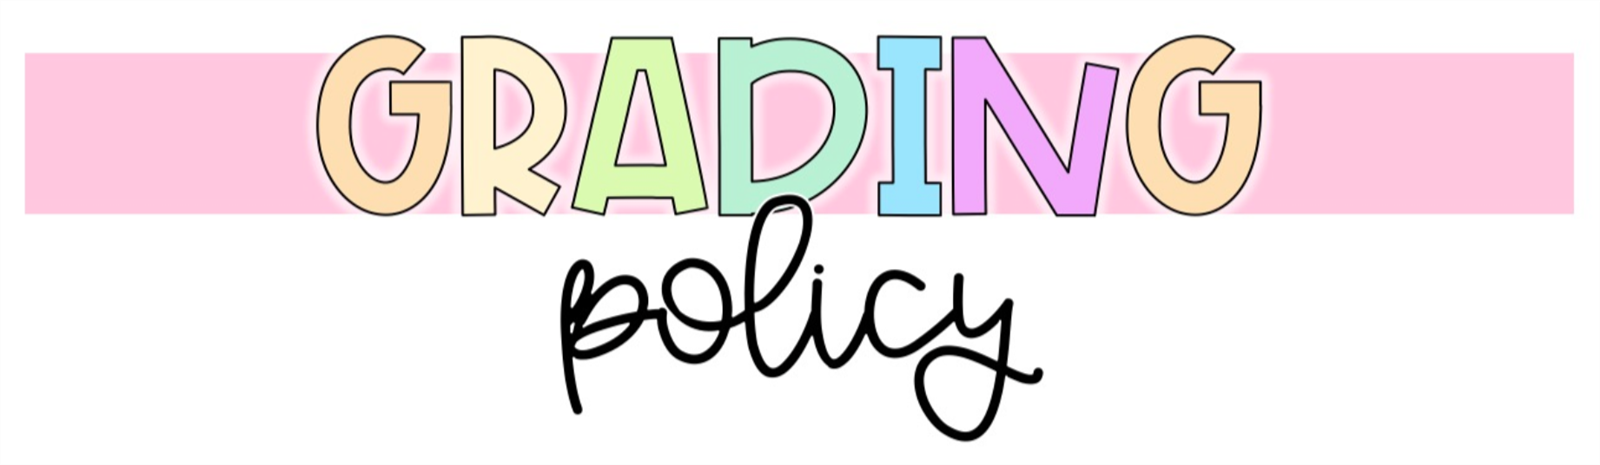 Grading Policy Banner